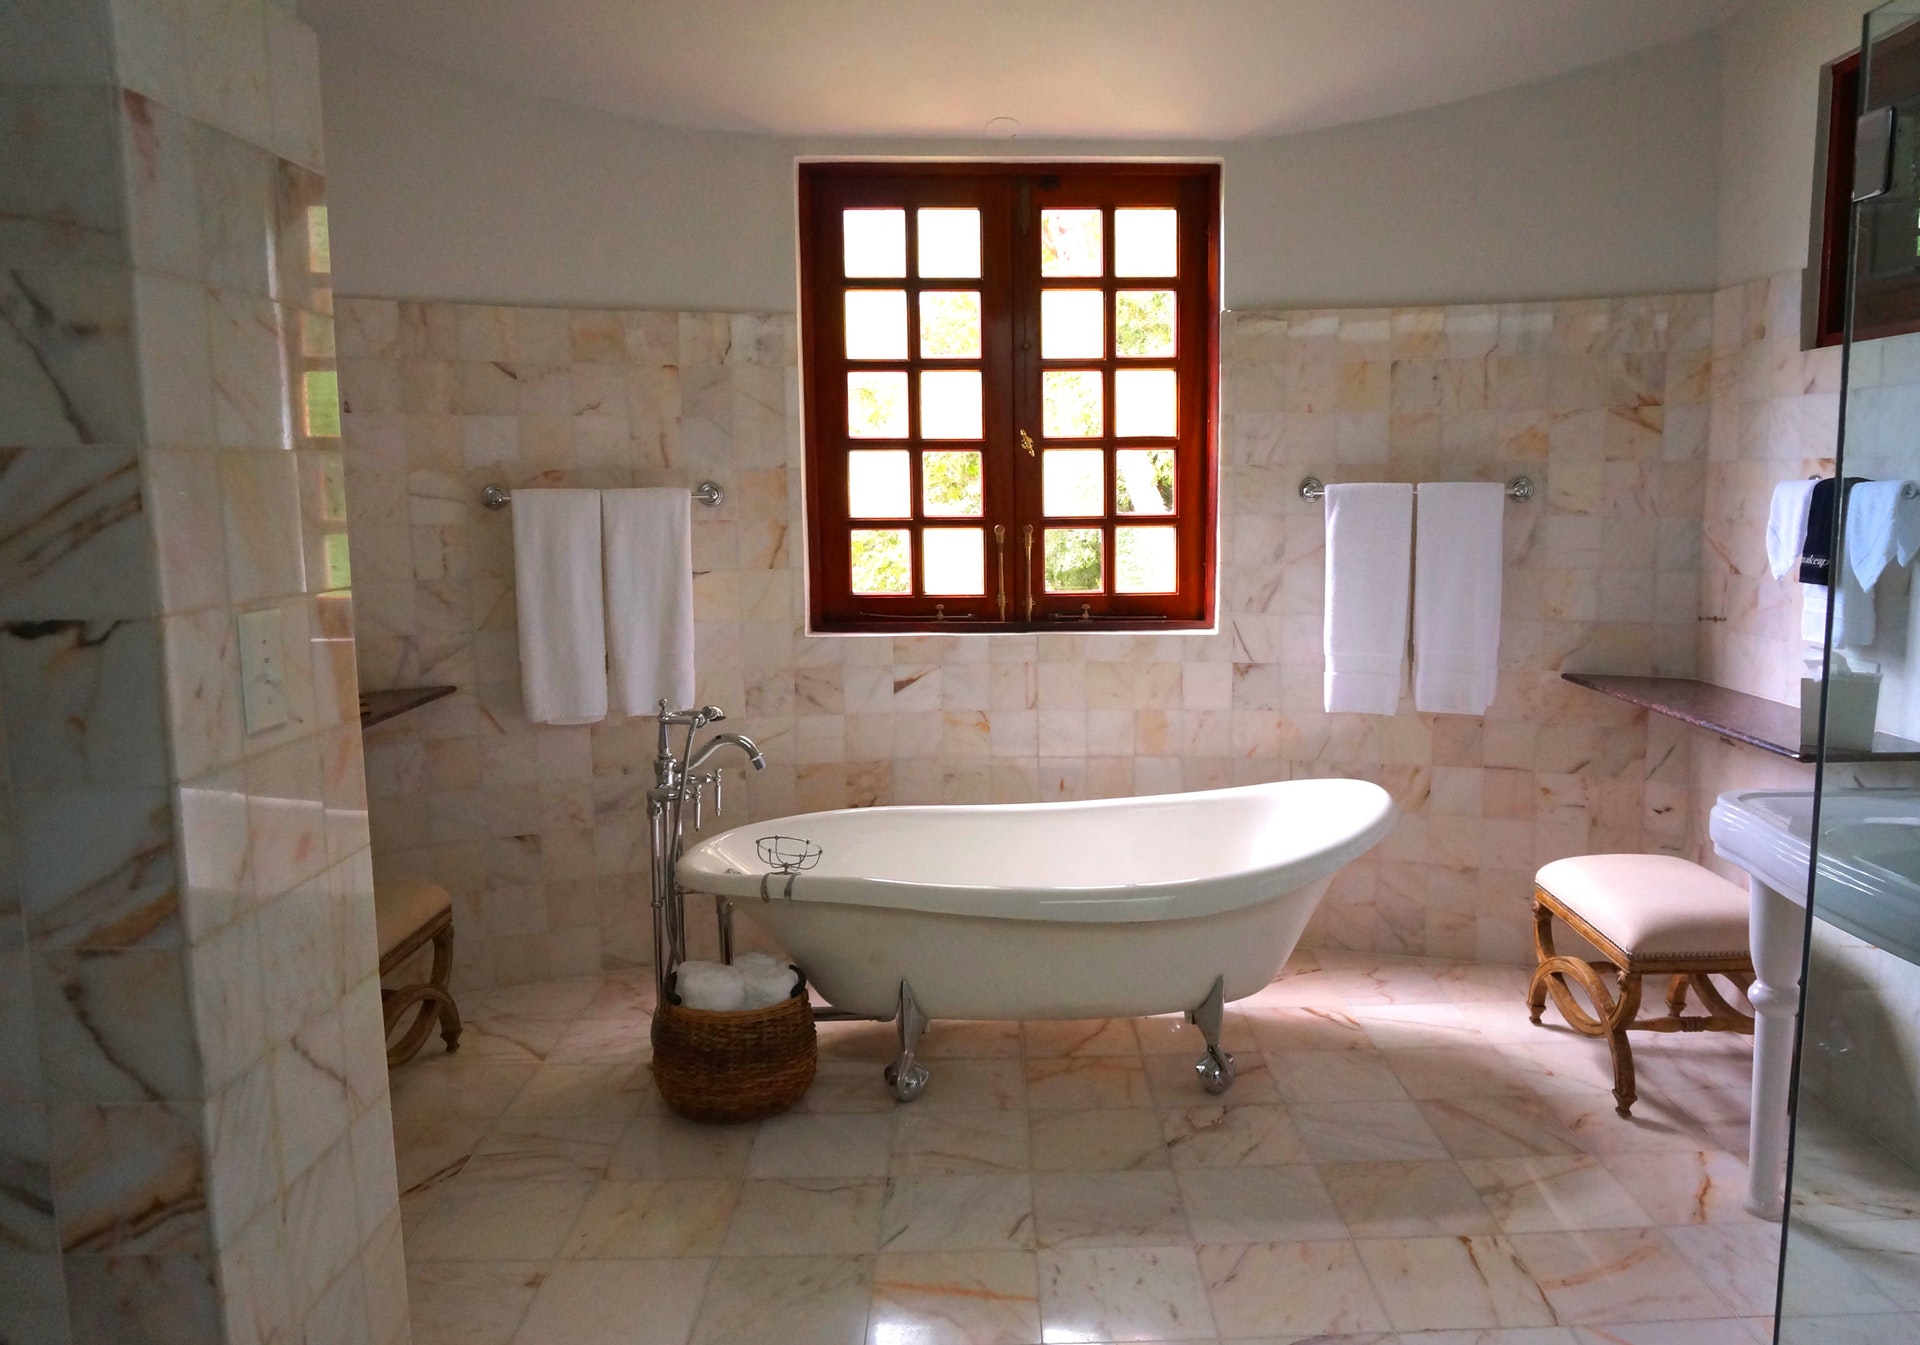 How You Can Benefit from a Bathroom Renovation